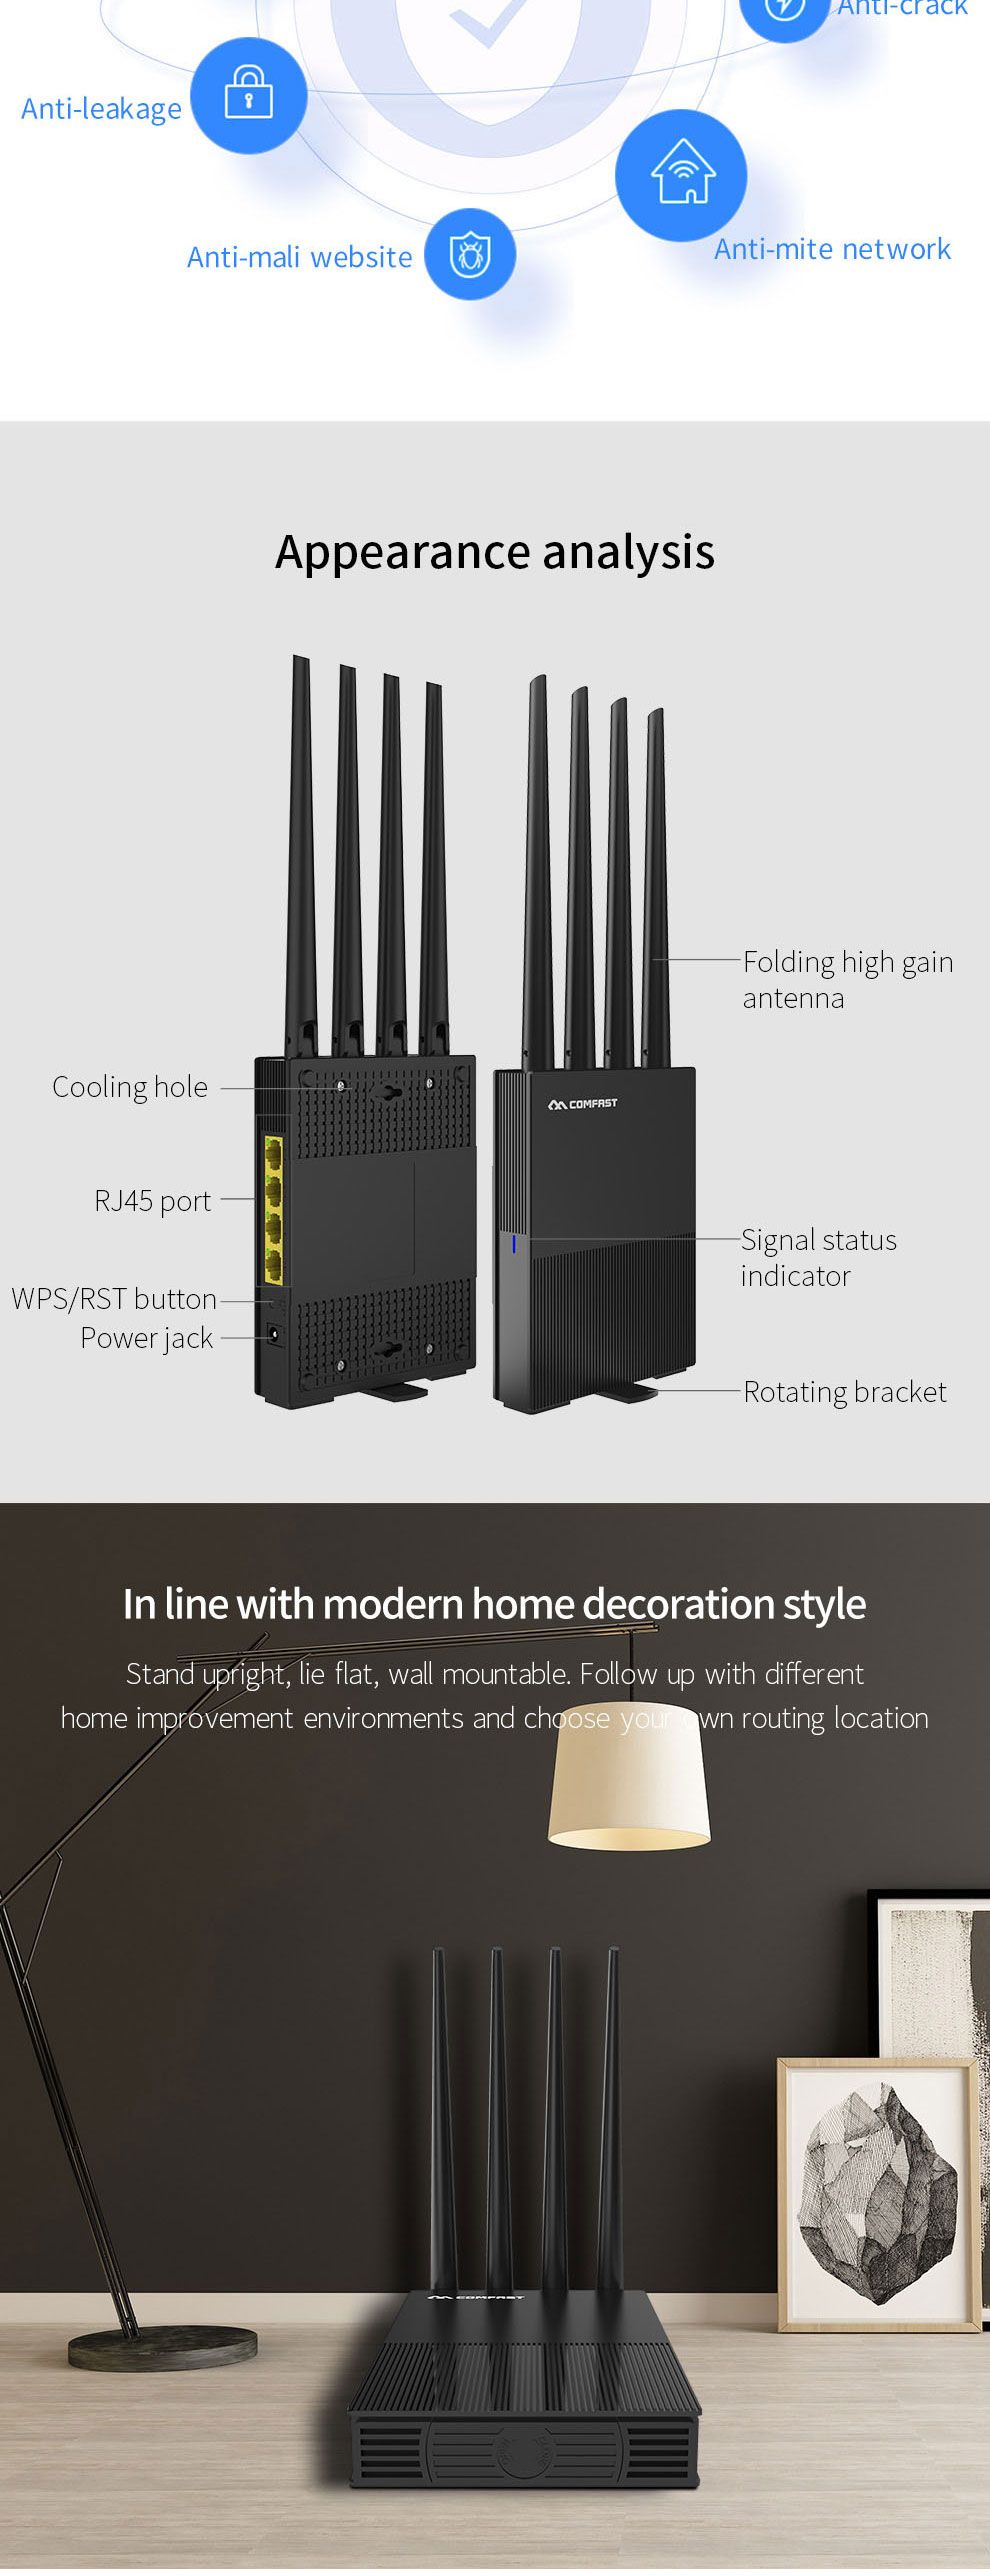 COMFAST-Dual-Band-Gigabit-Enterprise-Router-WiFi-Router-Industrial-Wireless-Routing-WR617AC-1572140